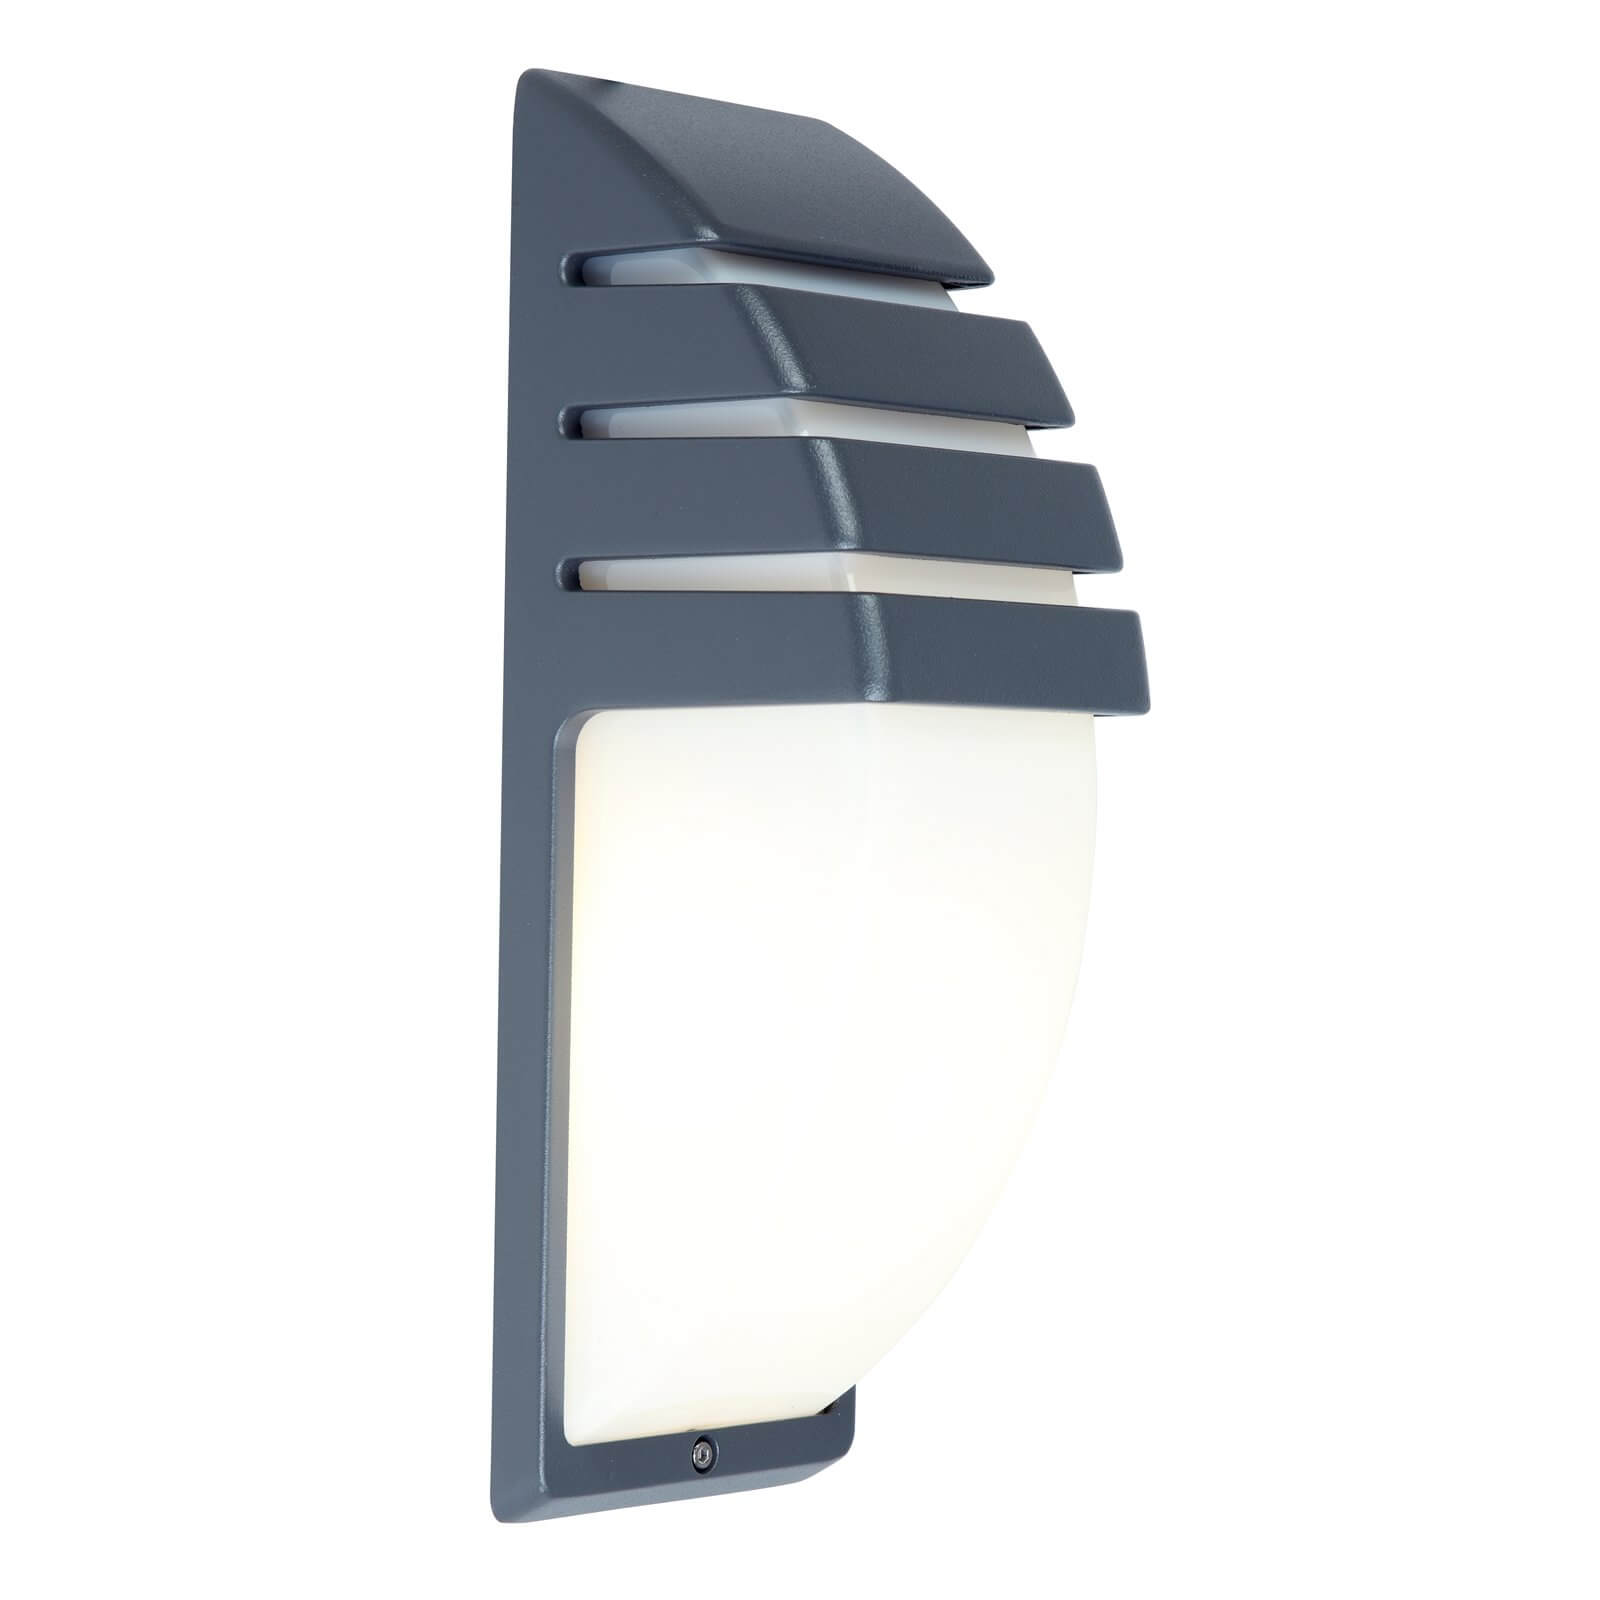 Lutec City Outdoor Bulkhead Wall Light - Anthracite